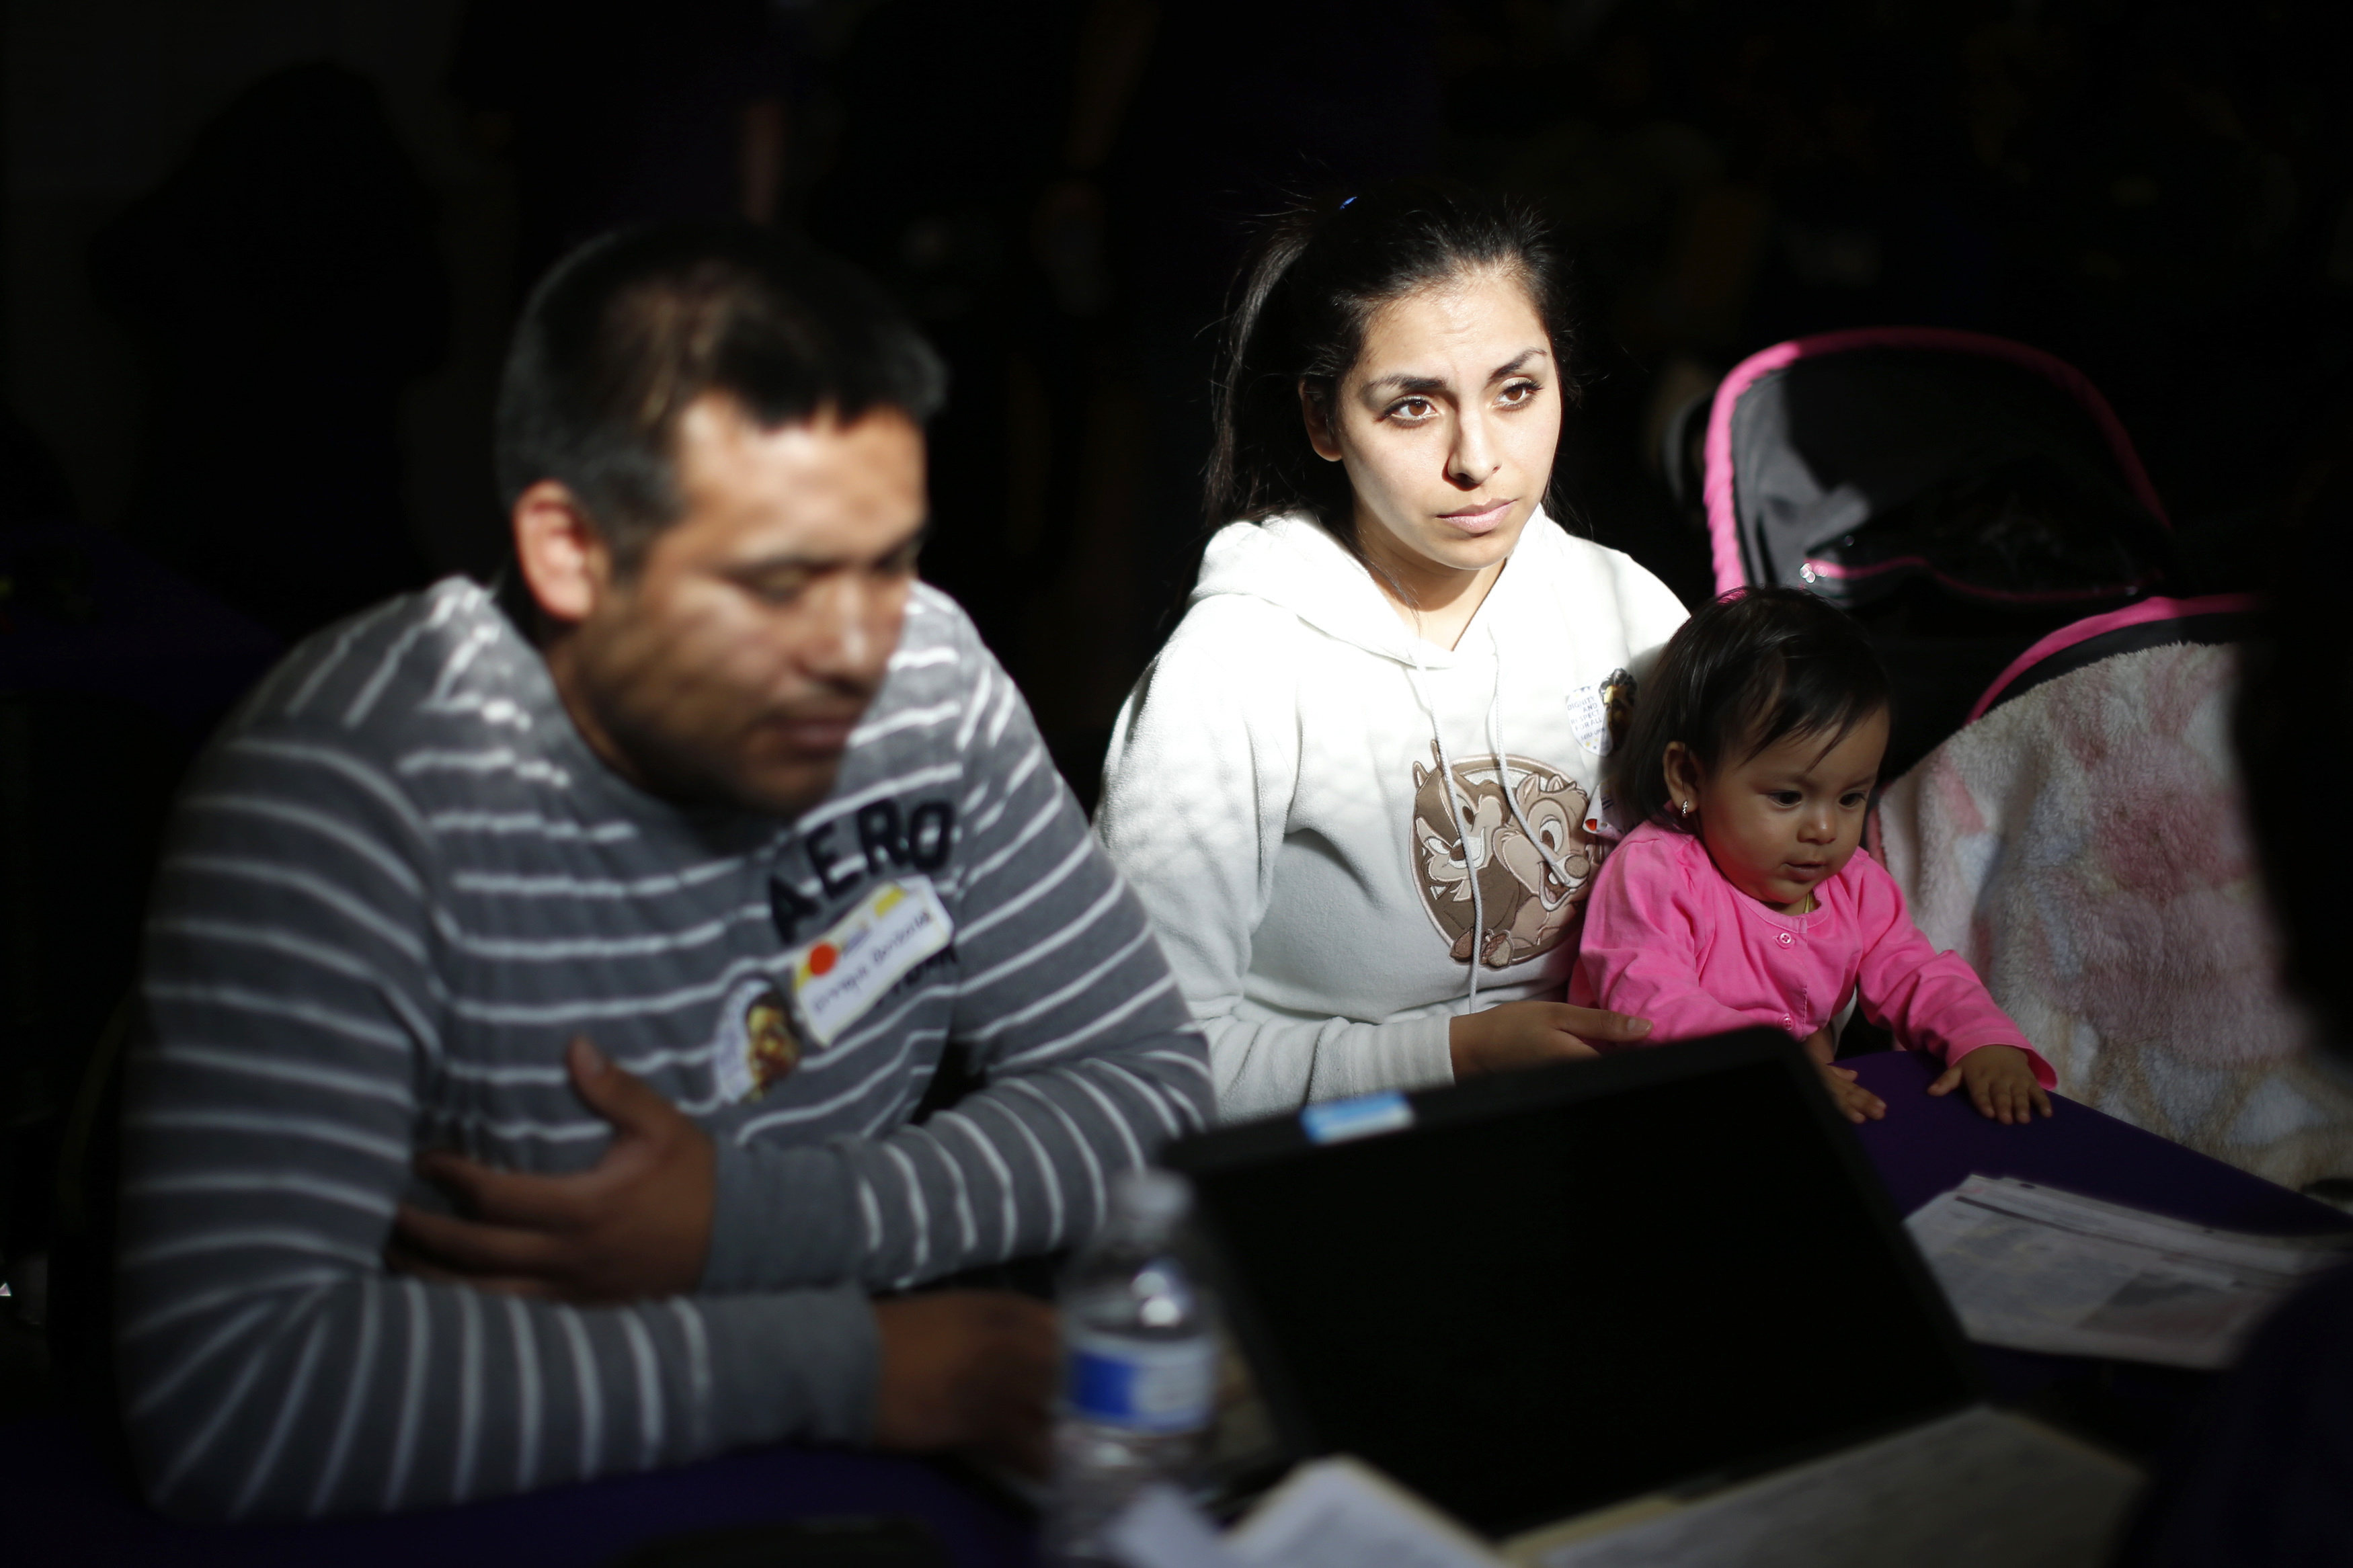 From left: Enrique Gonzalez, 22, Janet Regalado, 21, and their nine-month-old daughter Kayleen Gonzalez sign up for health insurance at an enrolment event in Commerce, Calif., on March 31, 2014. (Lucy Nicholson—Reuters)